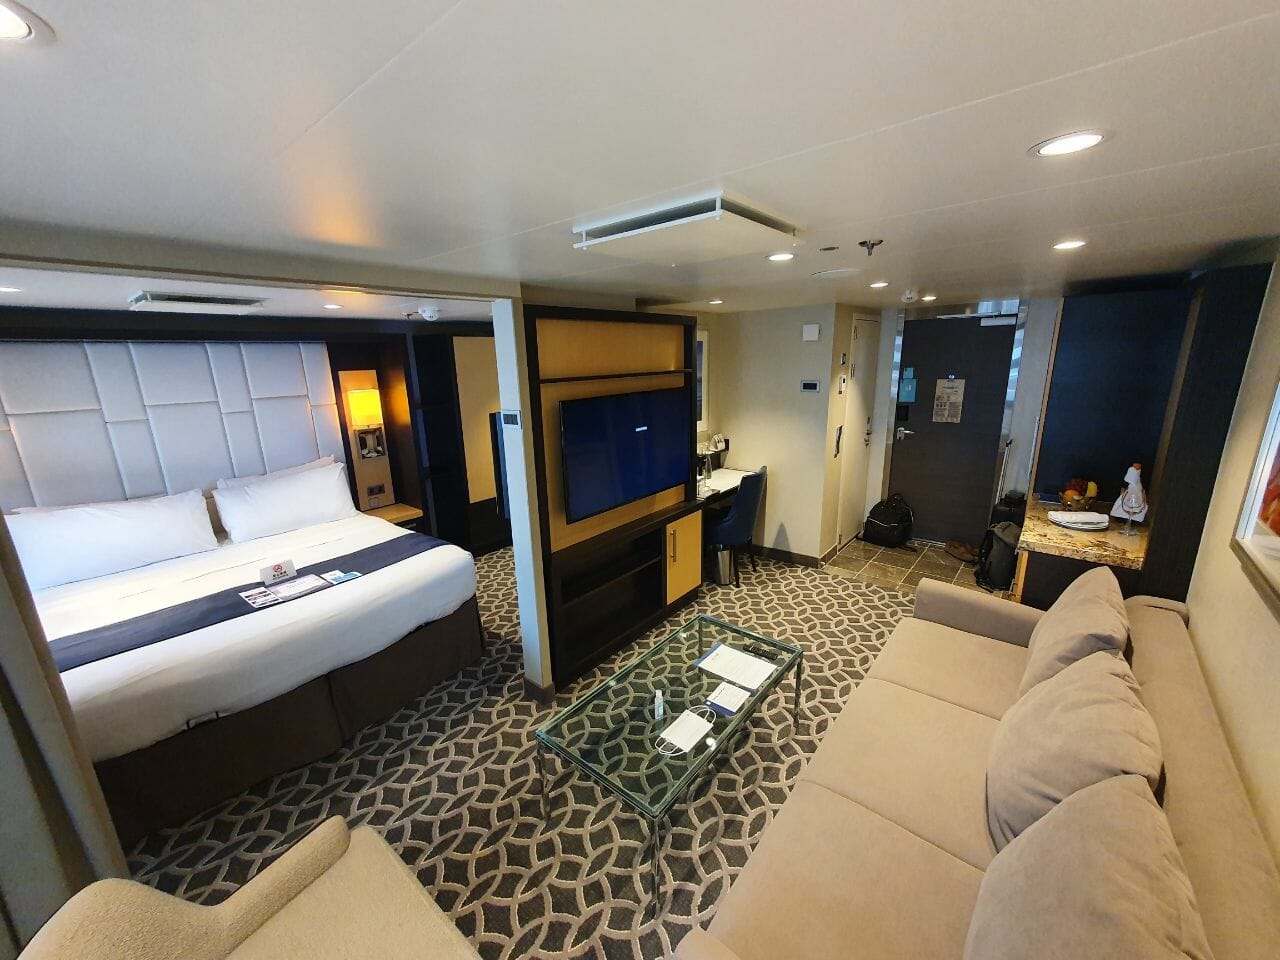 Which Royal Caribbean Suite Should I Book?